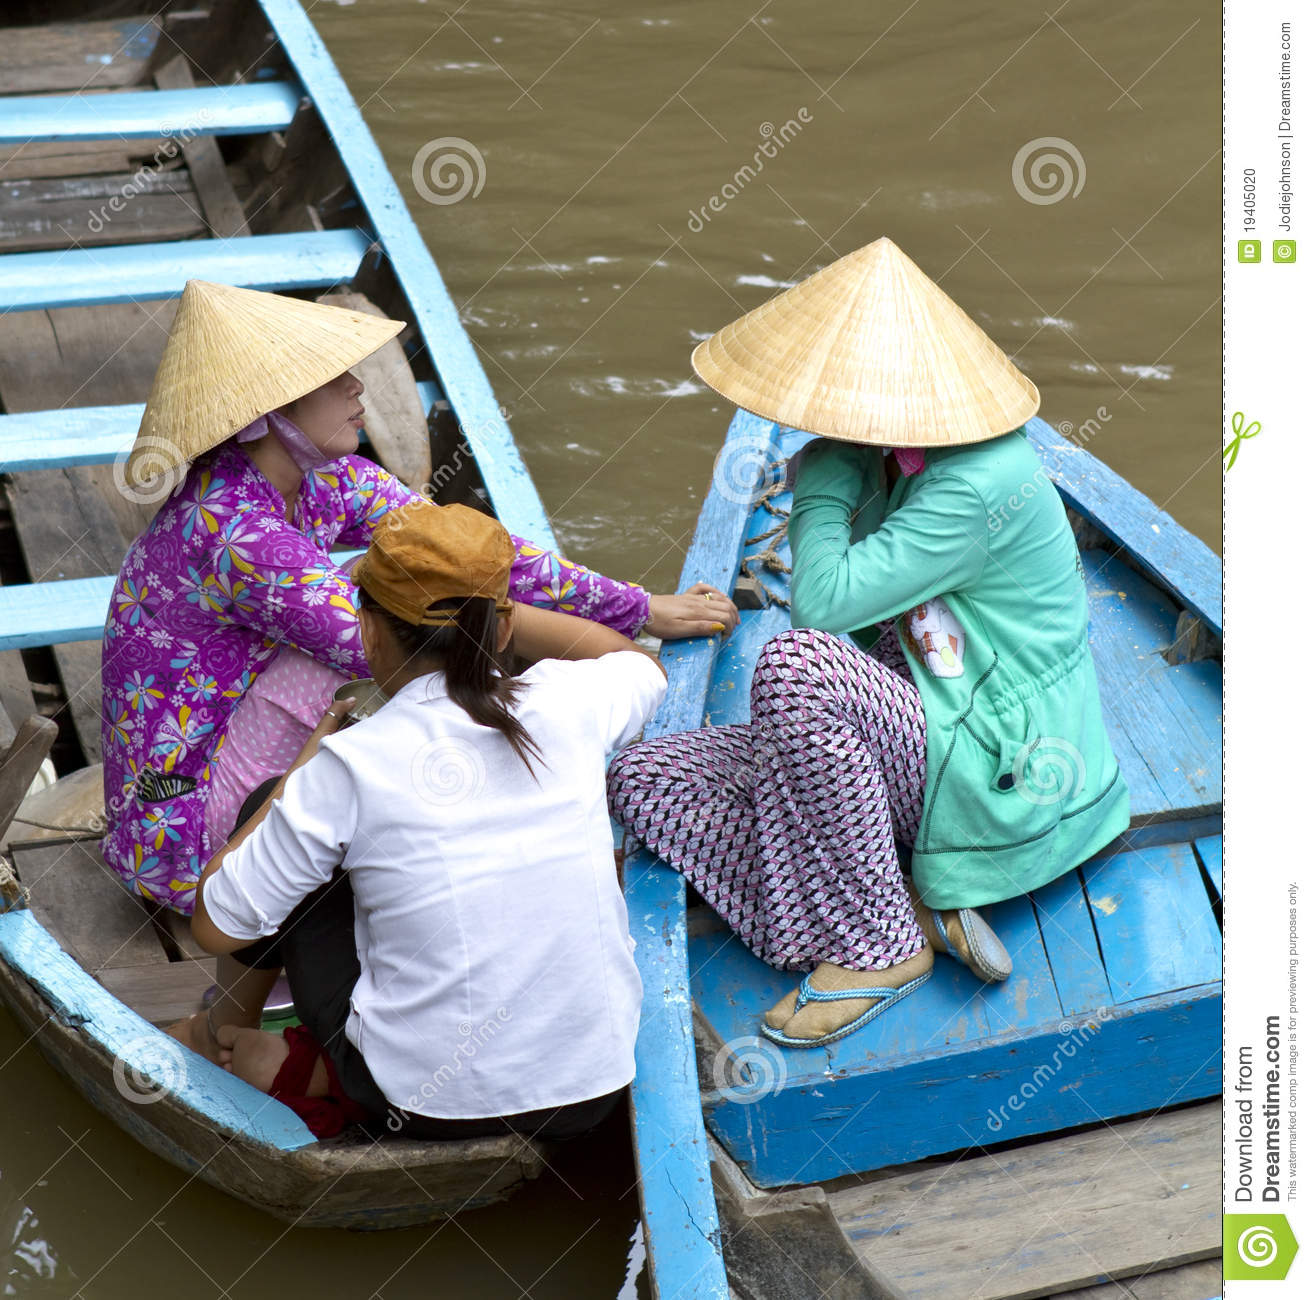 Vietnamese Women On The Mekong River Editorial Image   Image  19405020